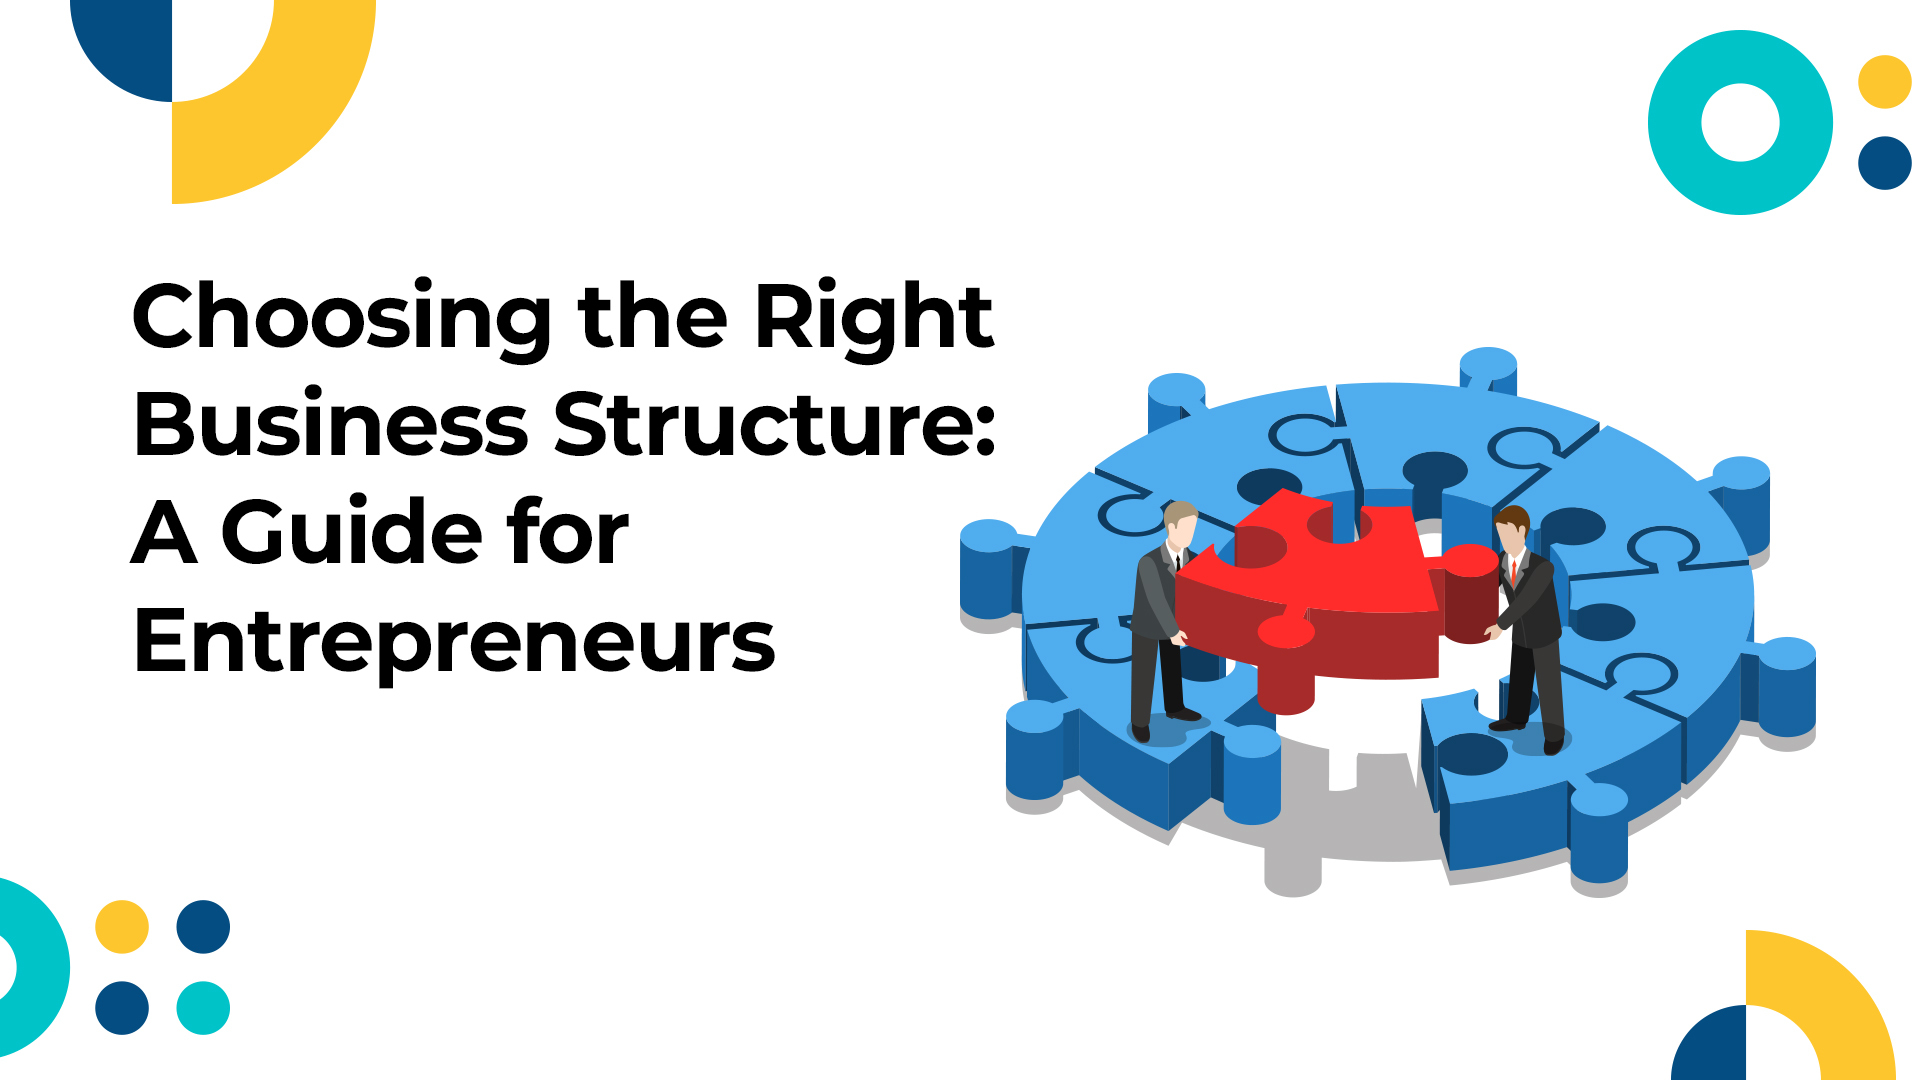 Choosing the Right Business Structure: A Guide for Entrepreneurs